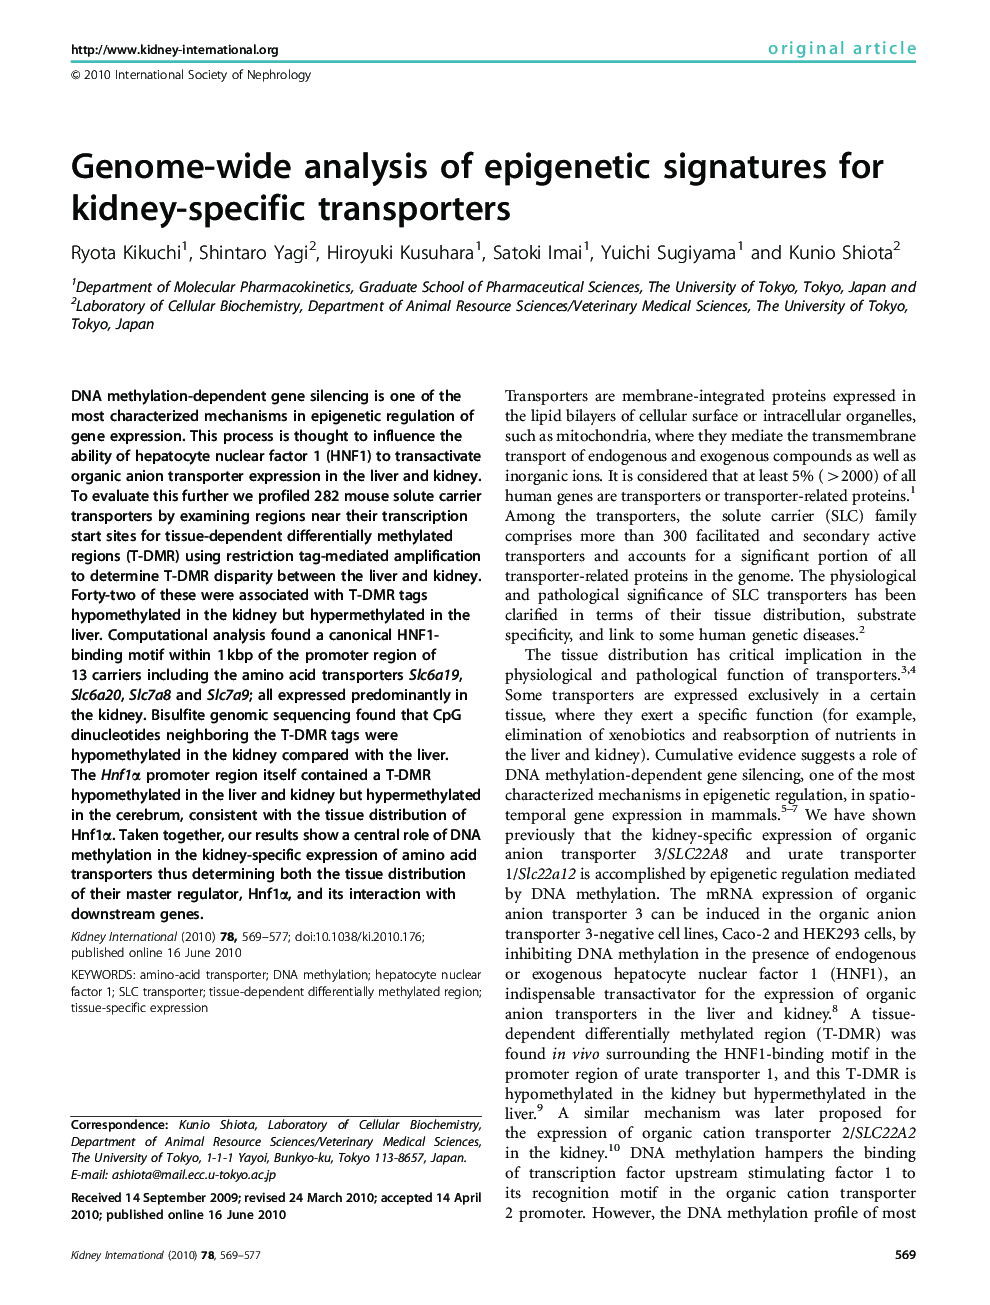 Genome-wide analysis of epigenetic signatures for kidney-specific transporters 